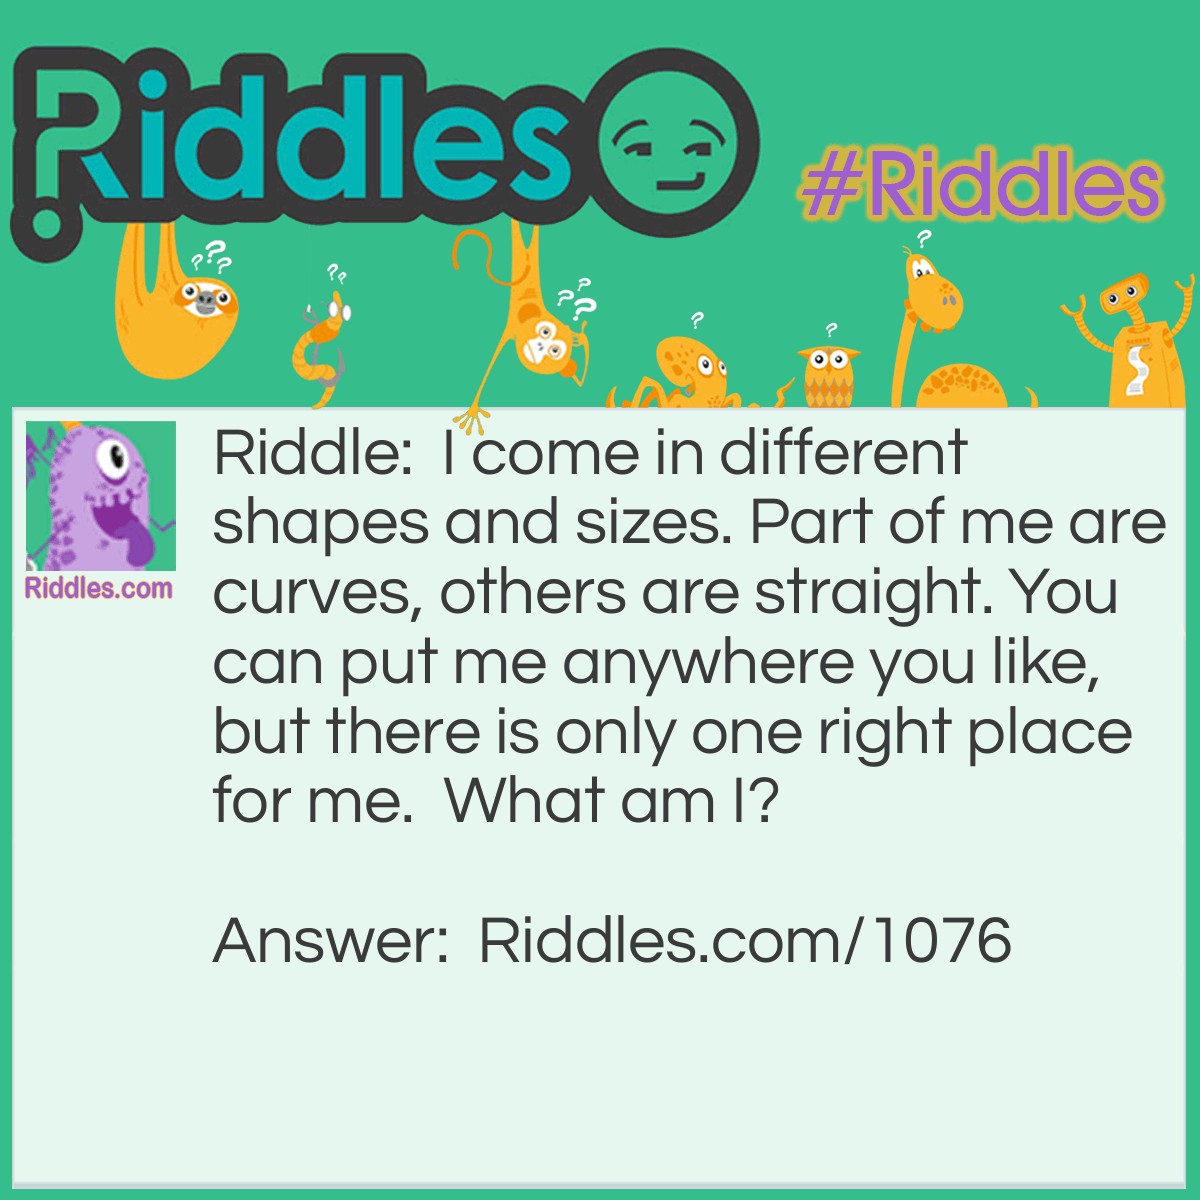 Riddle: I come in different shapes and sizes. Part of me are curves, others are straight. You can put me anywhere you like, but there is only one right place for me.  What am I? Answer: A Jigsaw Puzzle Piece.